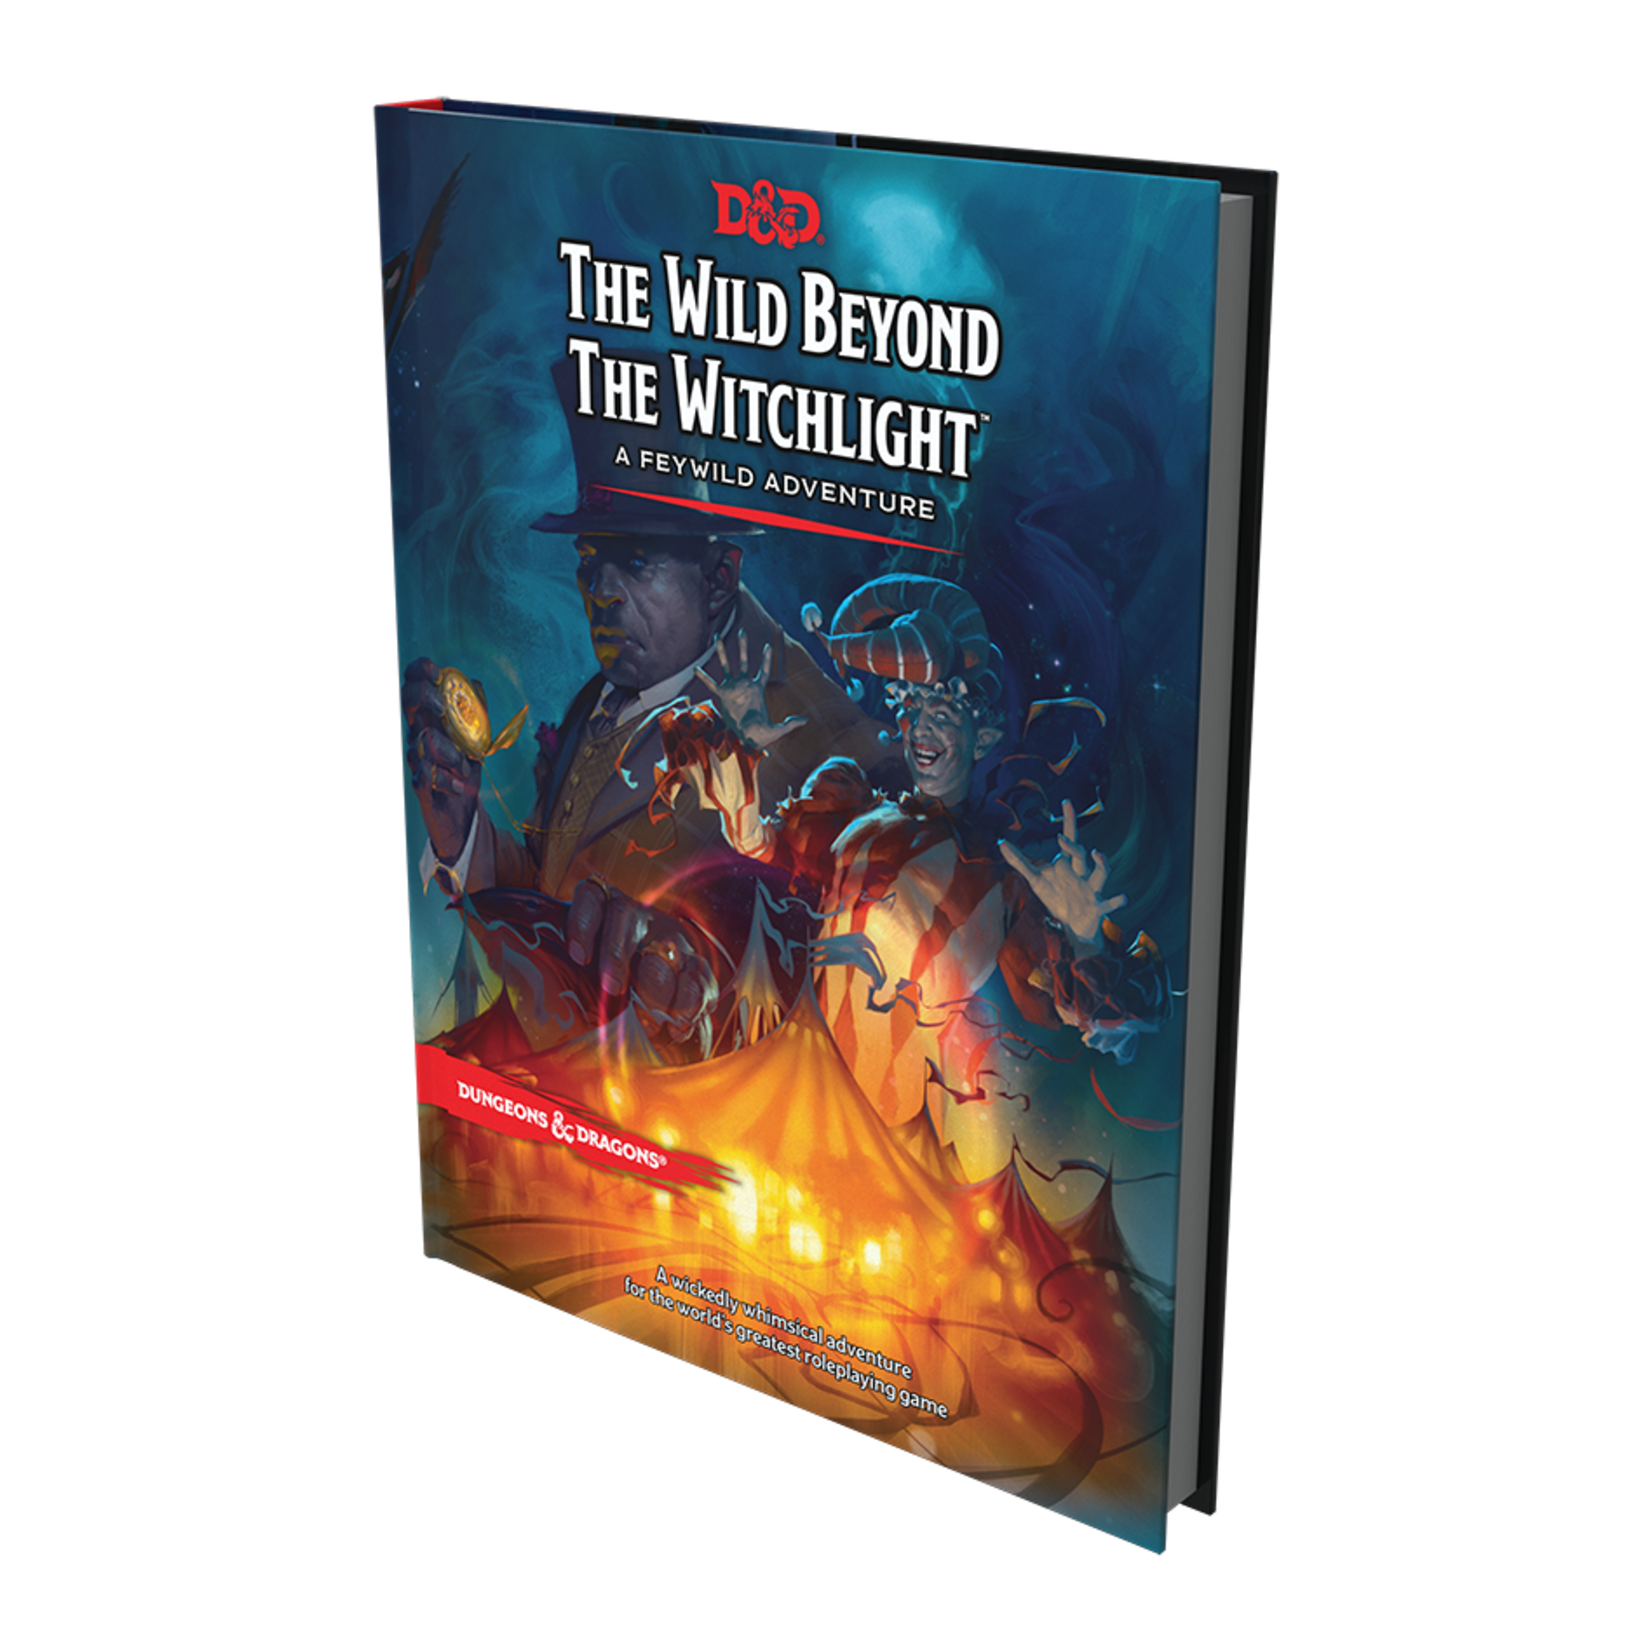 Dungeons & Dragons Dungeons & Dragons – The Wild Beyond the Witchlight, A Feywild Adventure (5th Edition, Regular Cover)